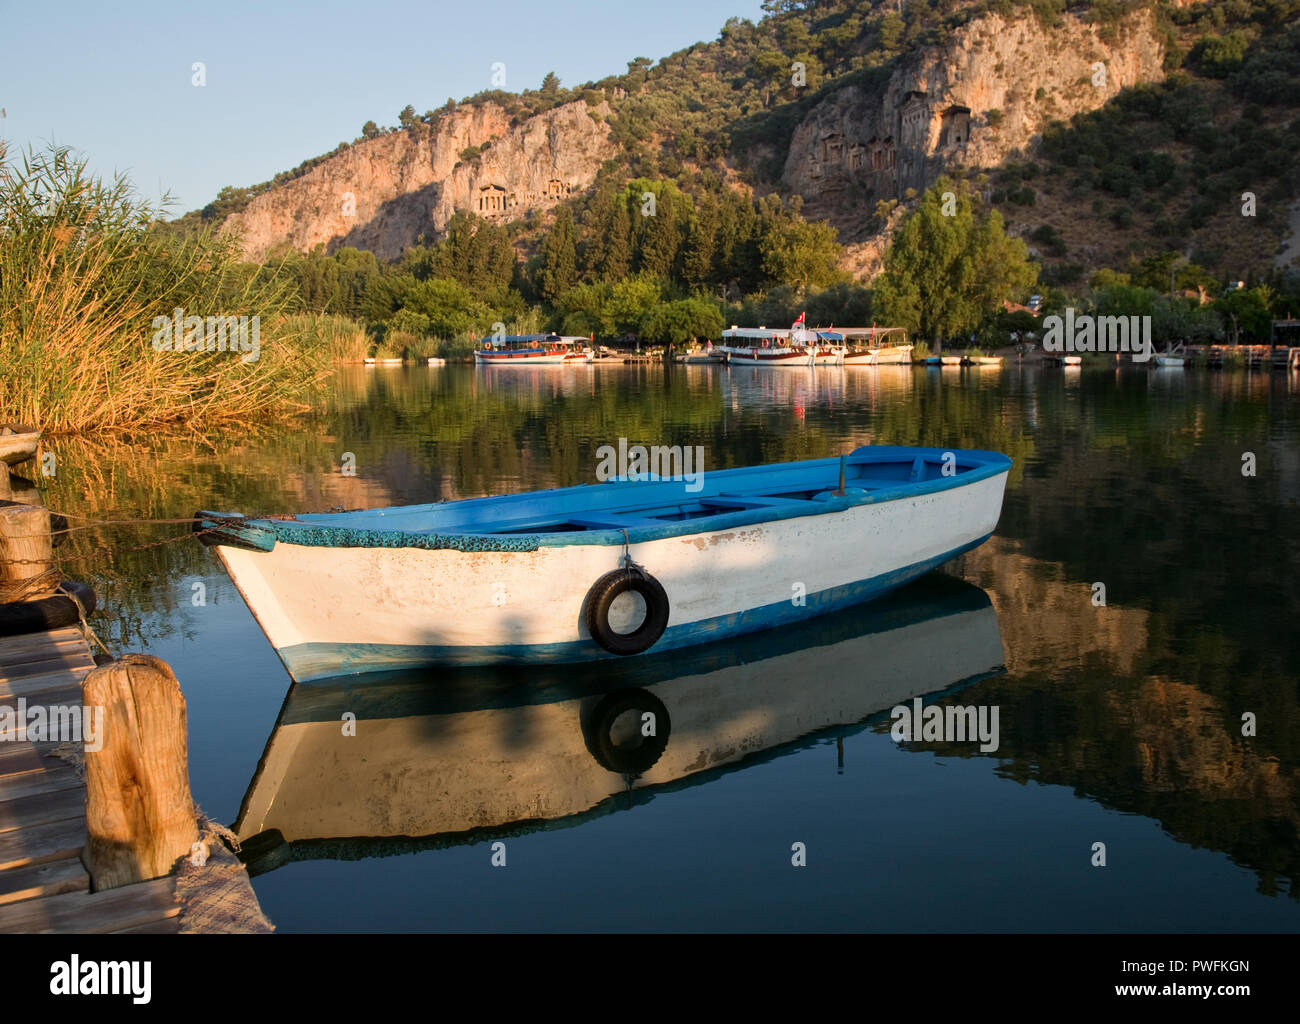 One of the many riverboats that take tourists from the town of Dalyan, Turkey to the beach a few miles away. The classic African Queen was filmed ther Stock Photo